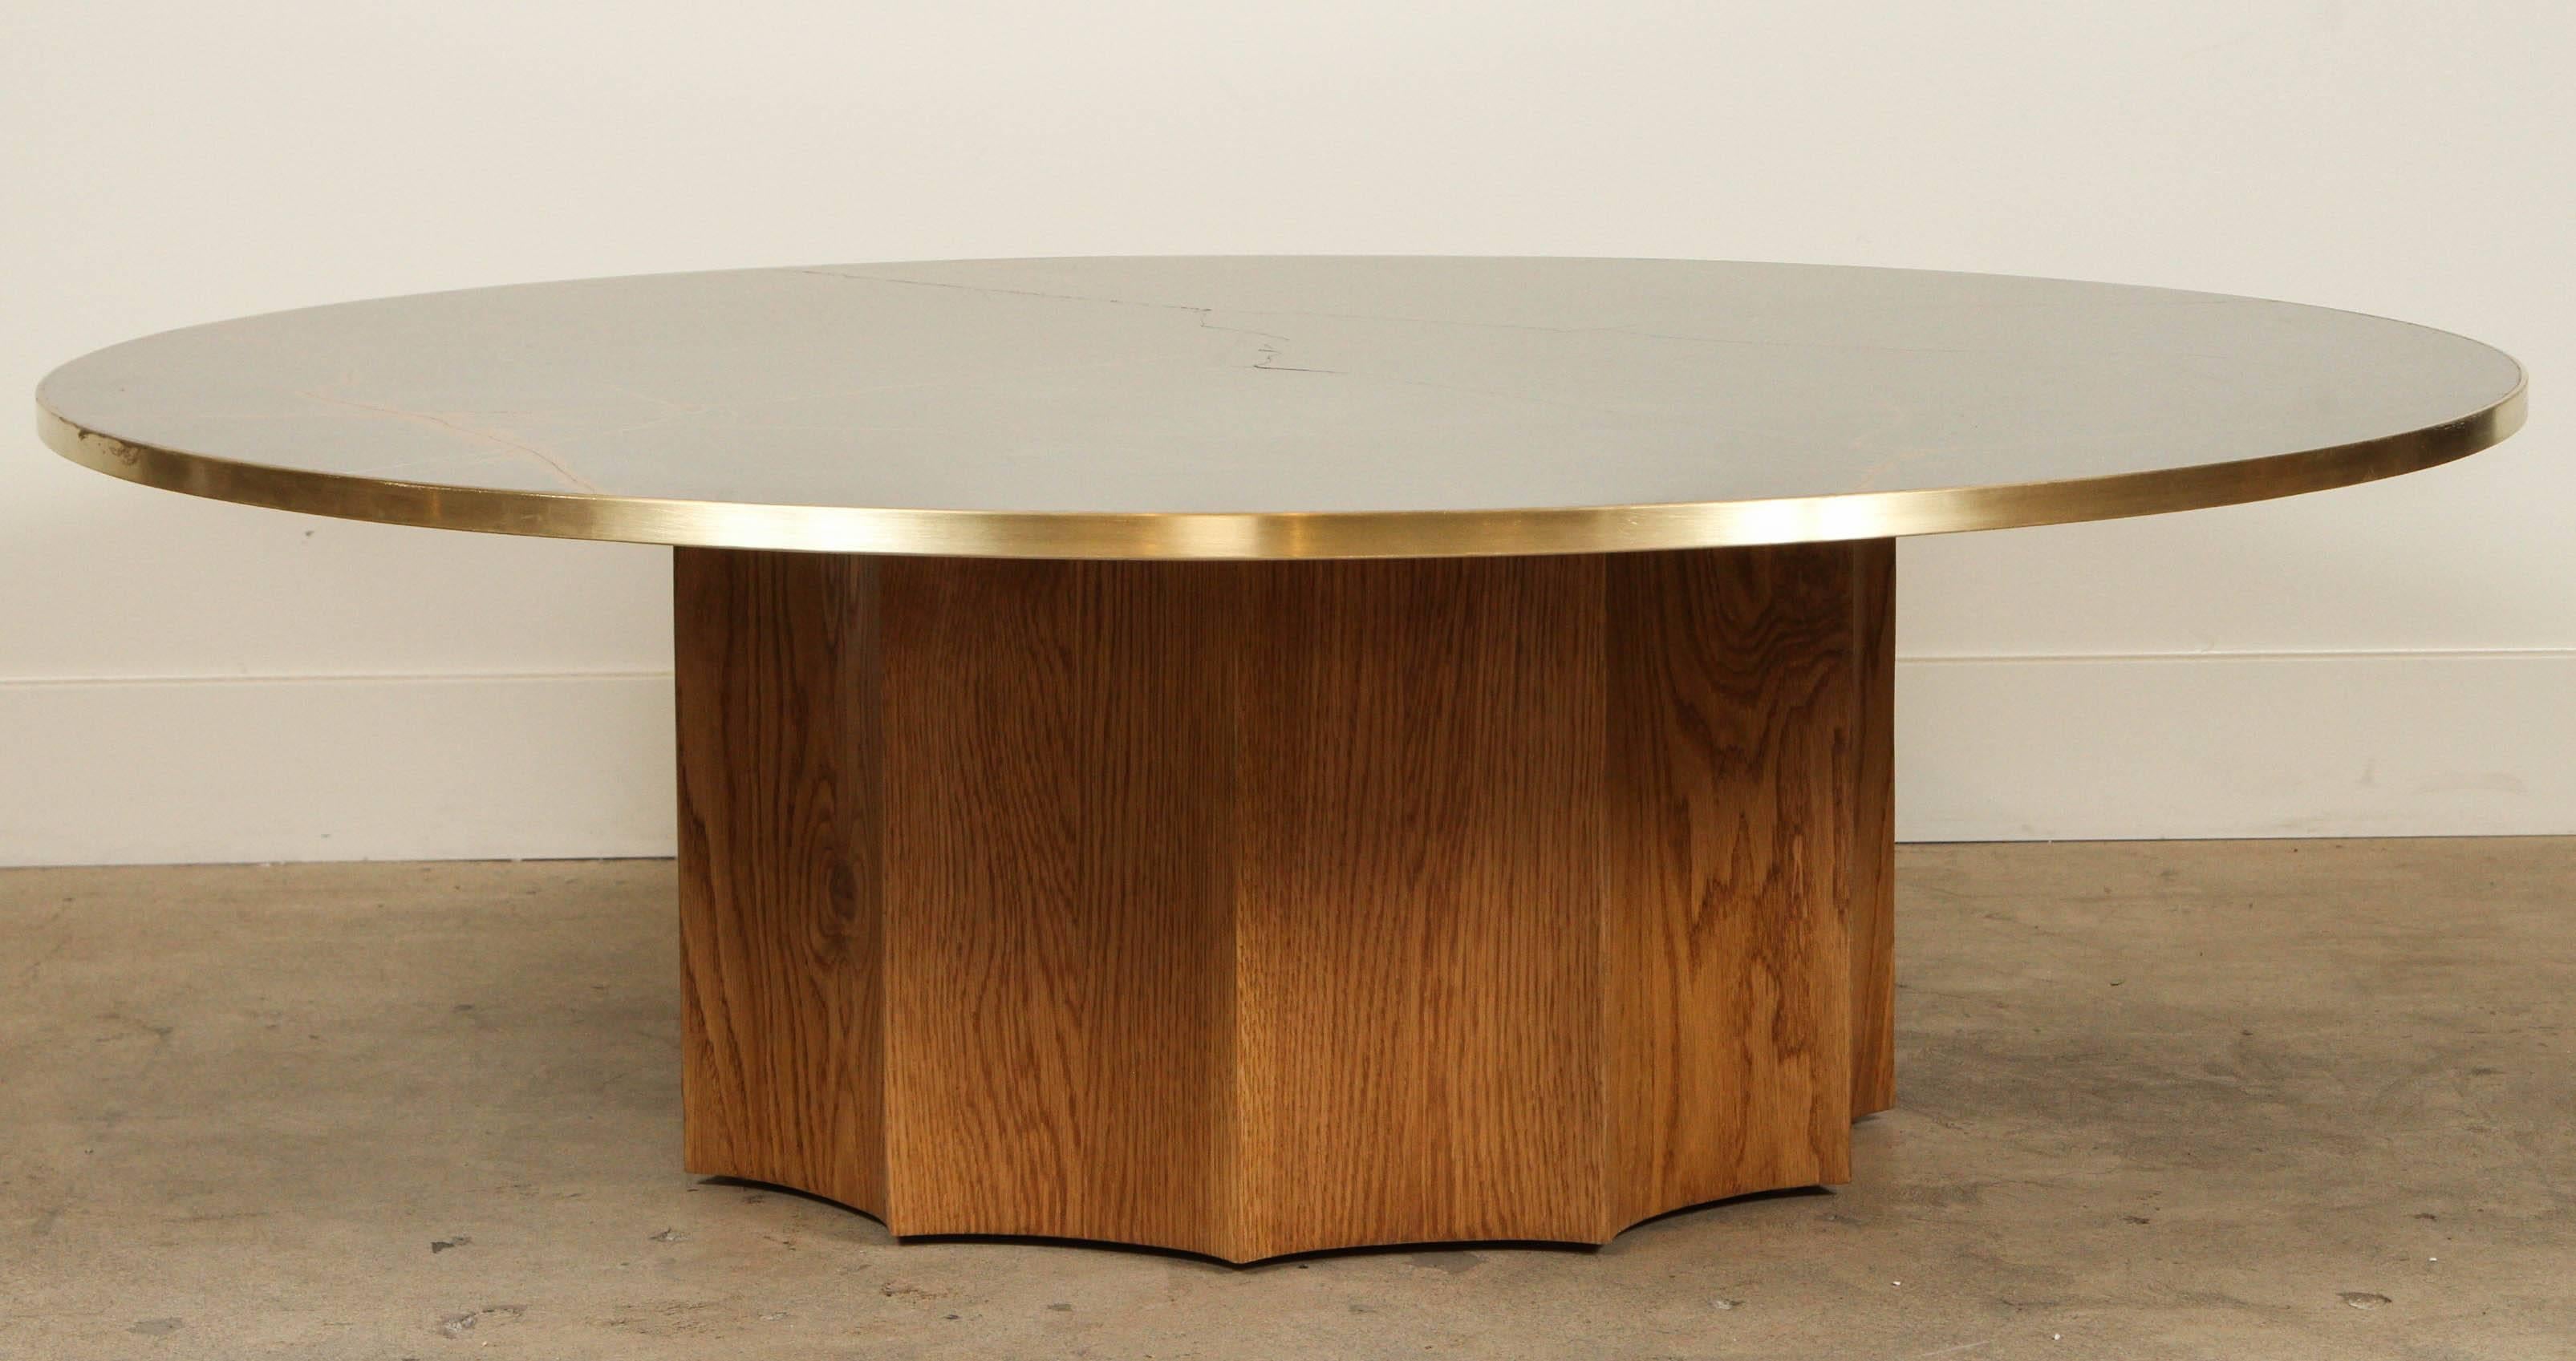 Normandie Coffee Table by Lawson-Fenning 

Available to order in different finishes with a 10-12 week lead time.